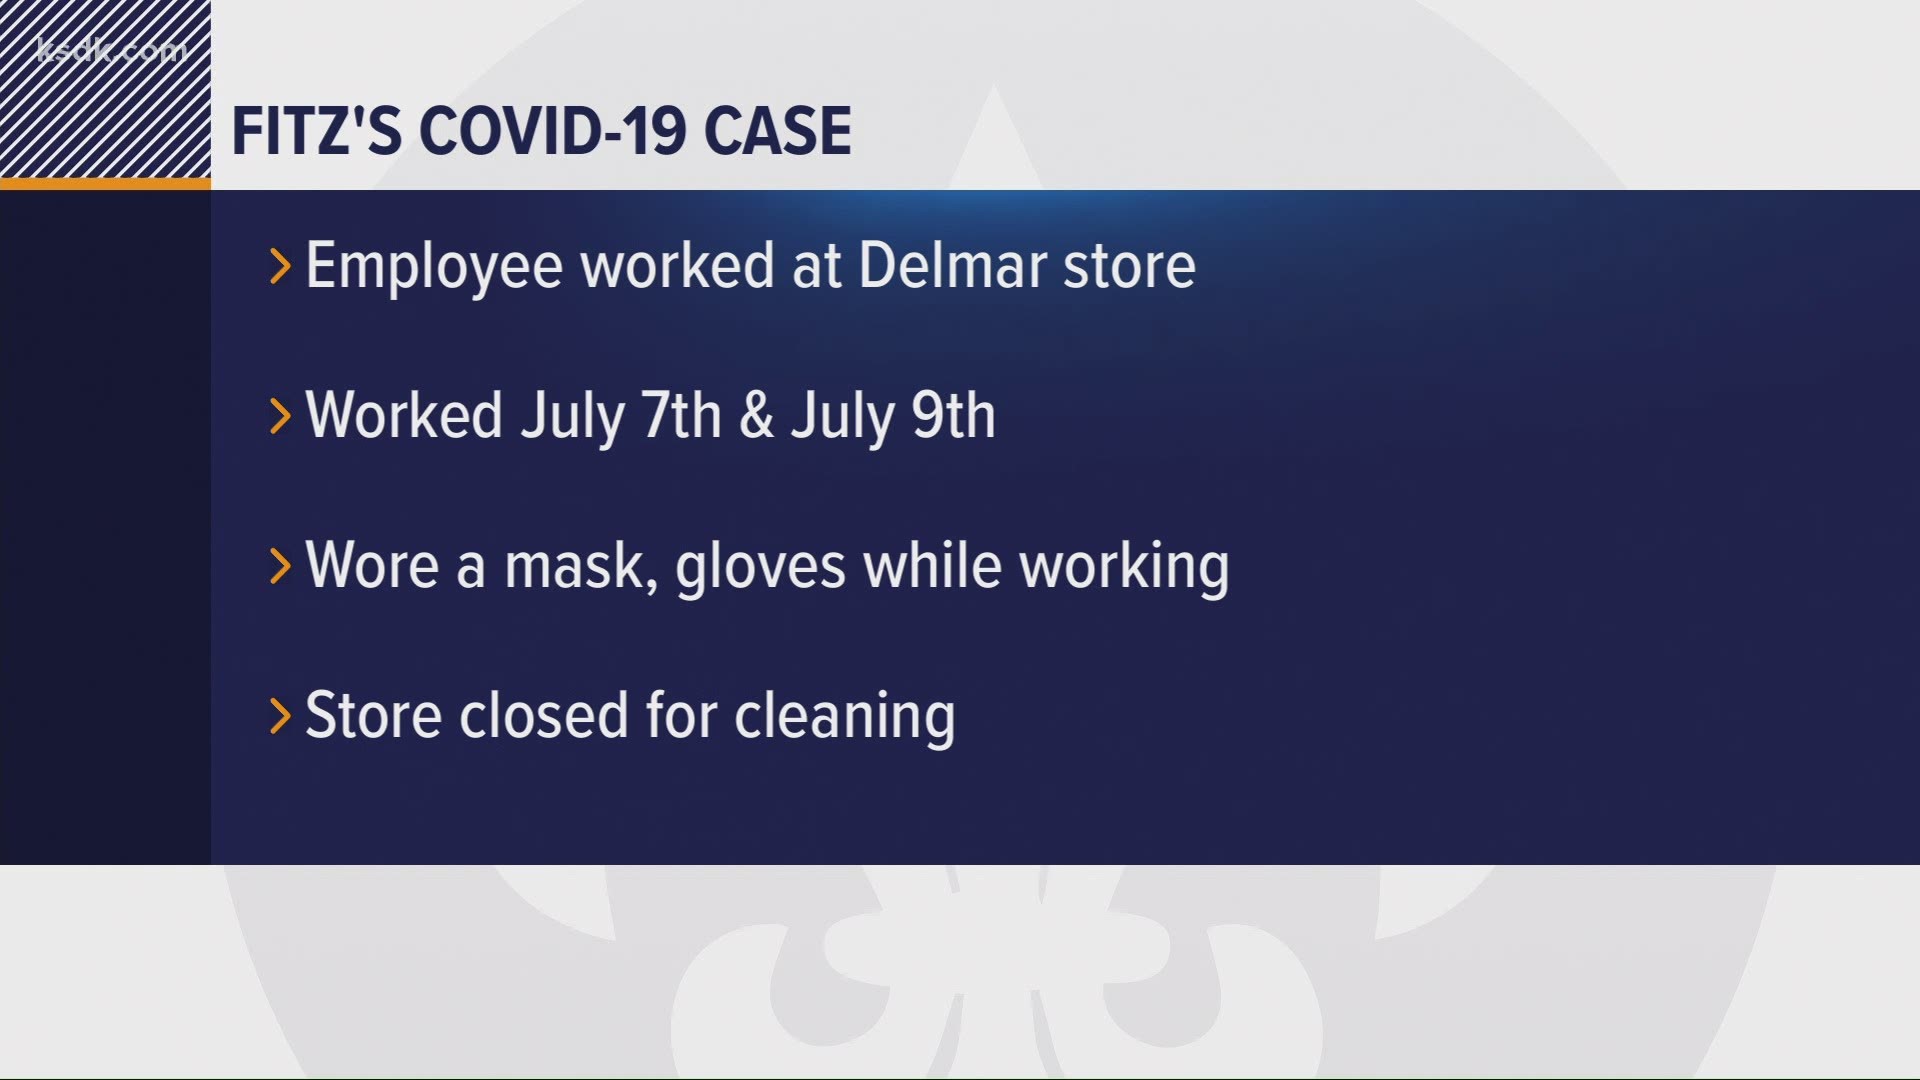 The server last worked on July 7 and 9 and wore a mask and gloves at all times, the restaurant chain said